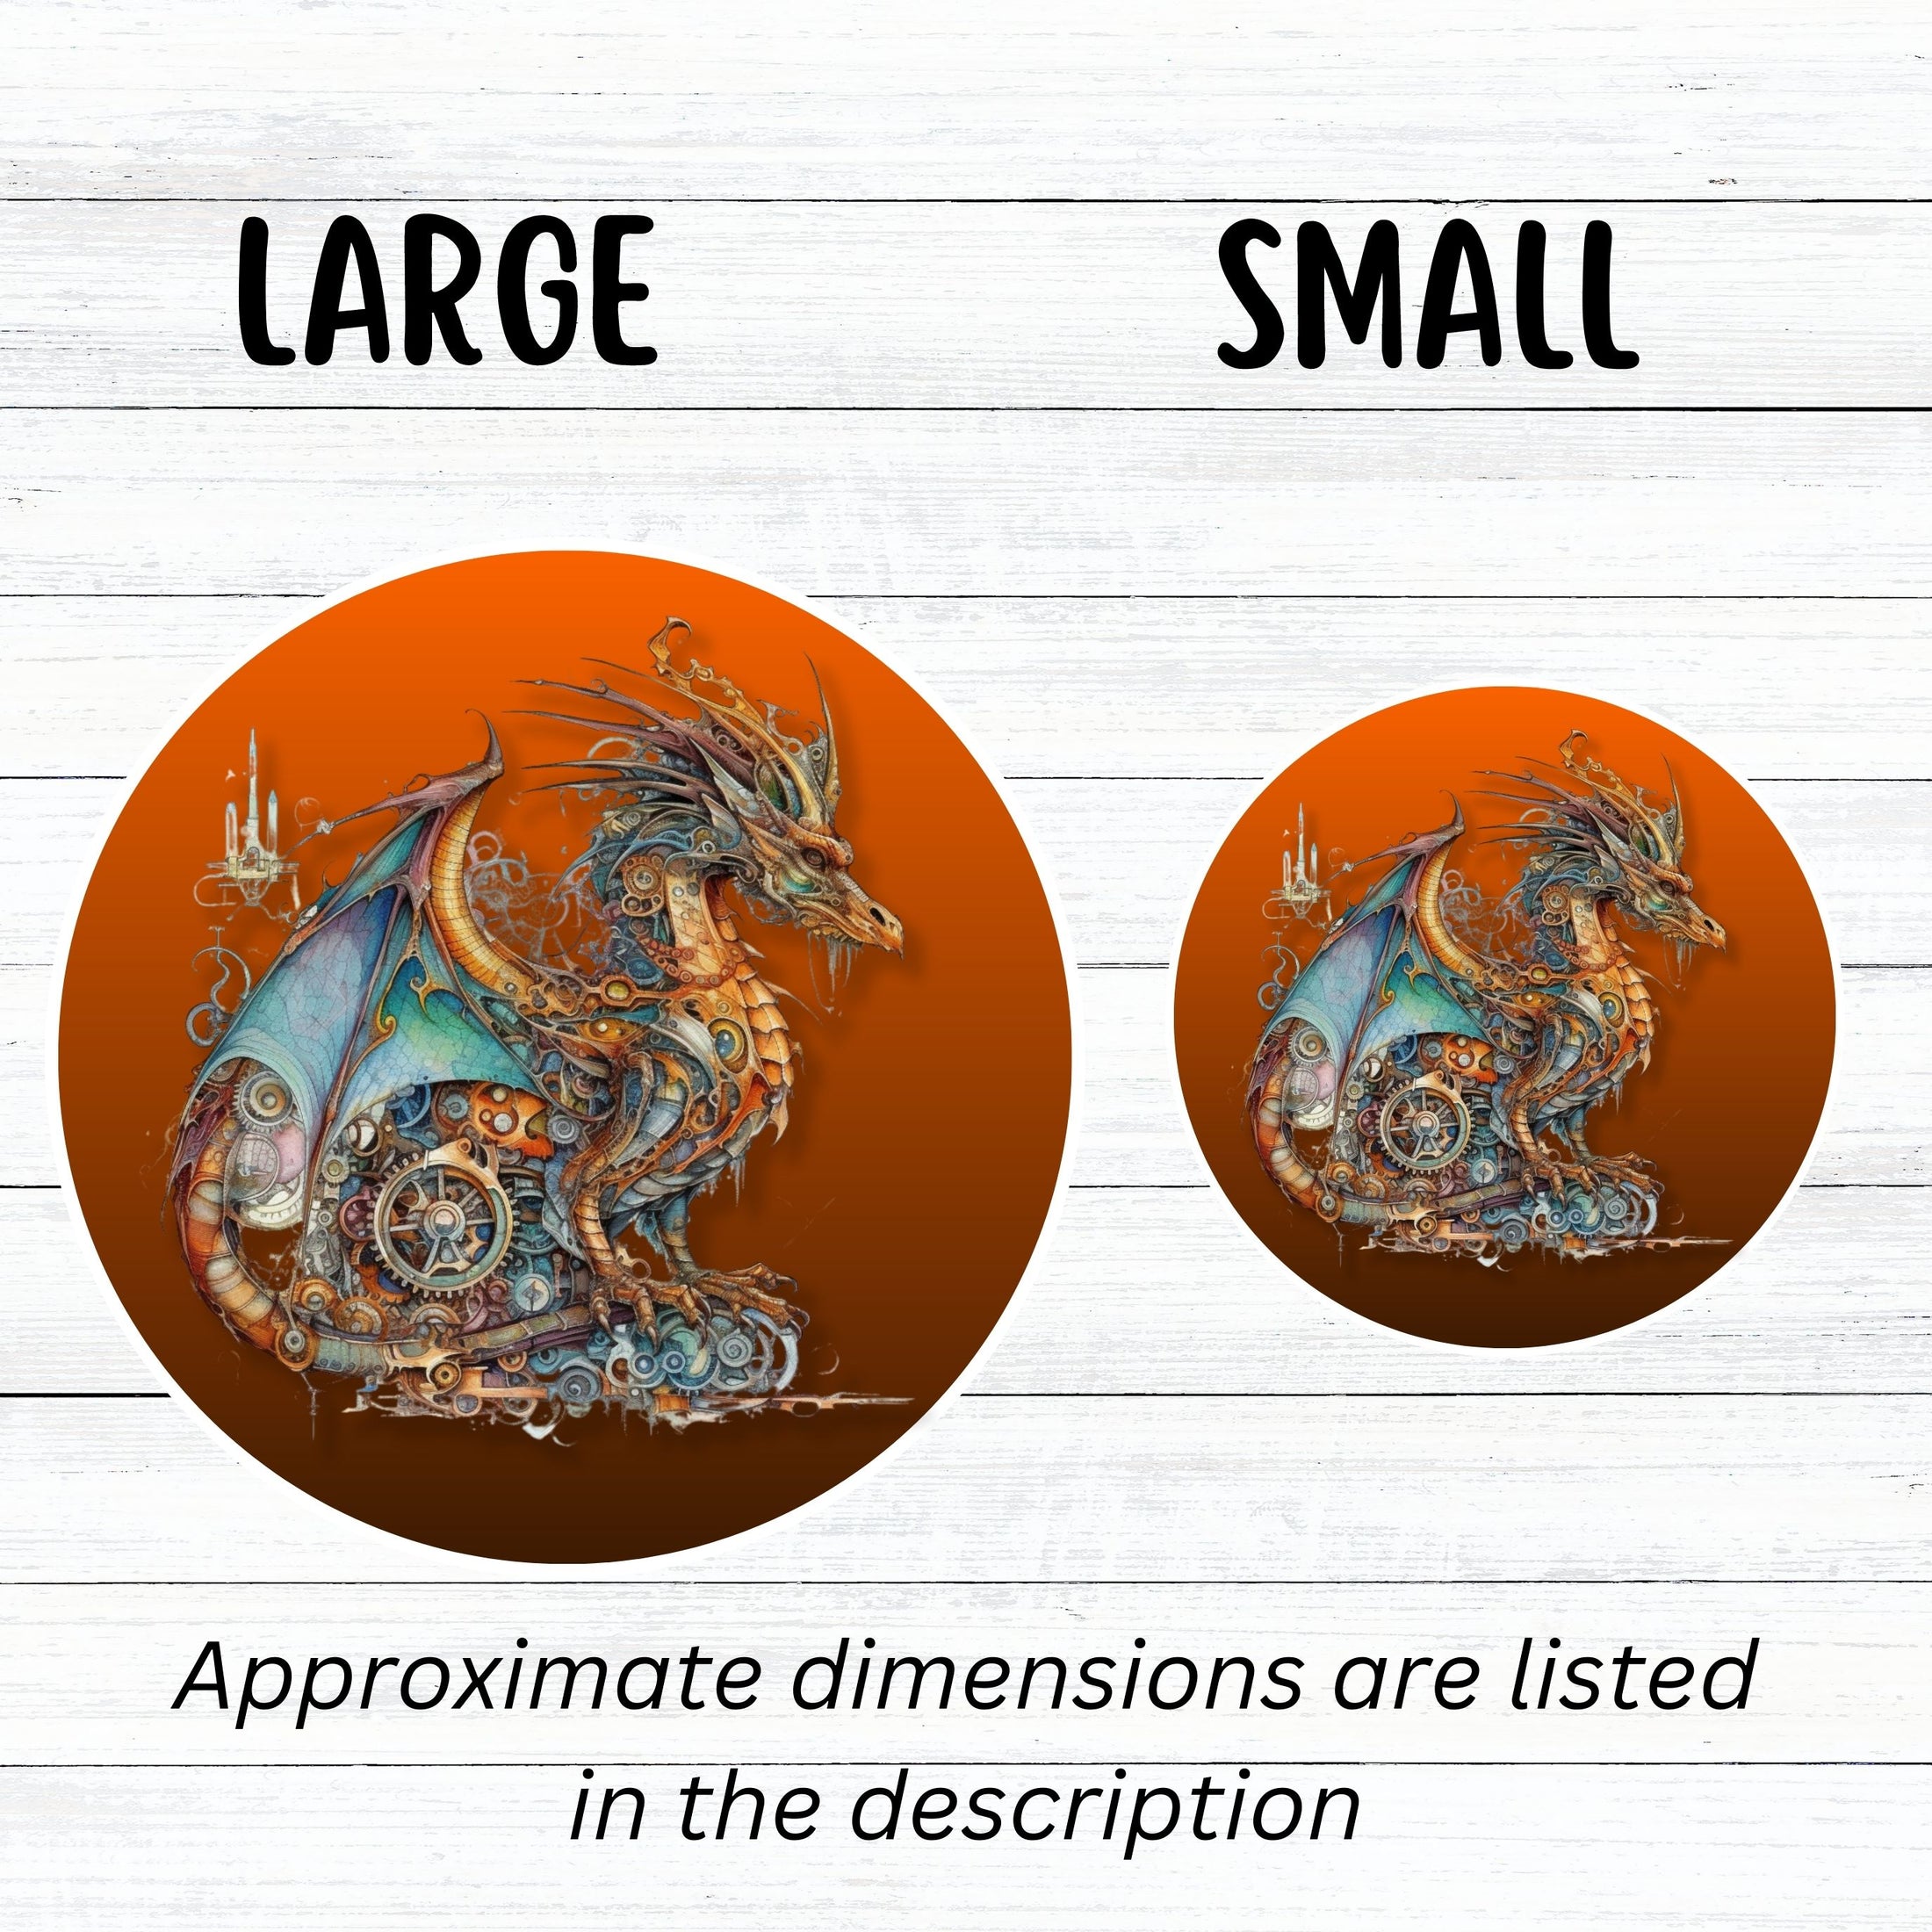 This image shows large and small steampunk dragon stickers next to each other.